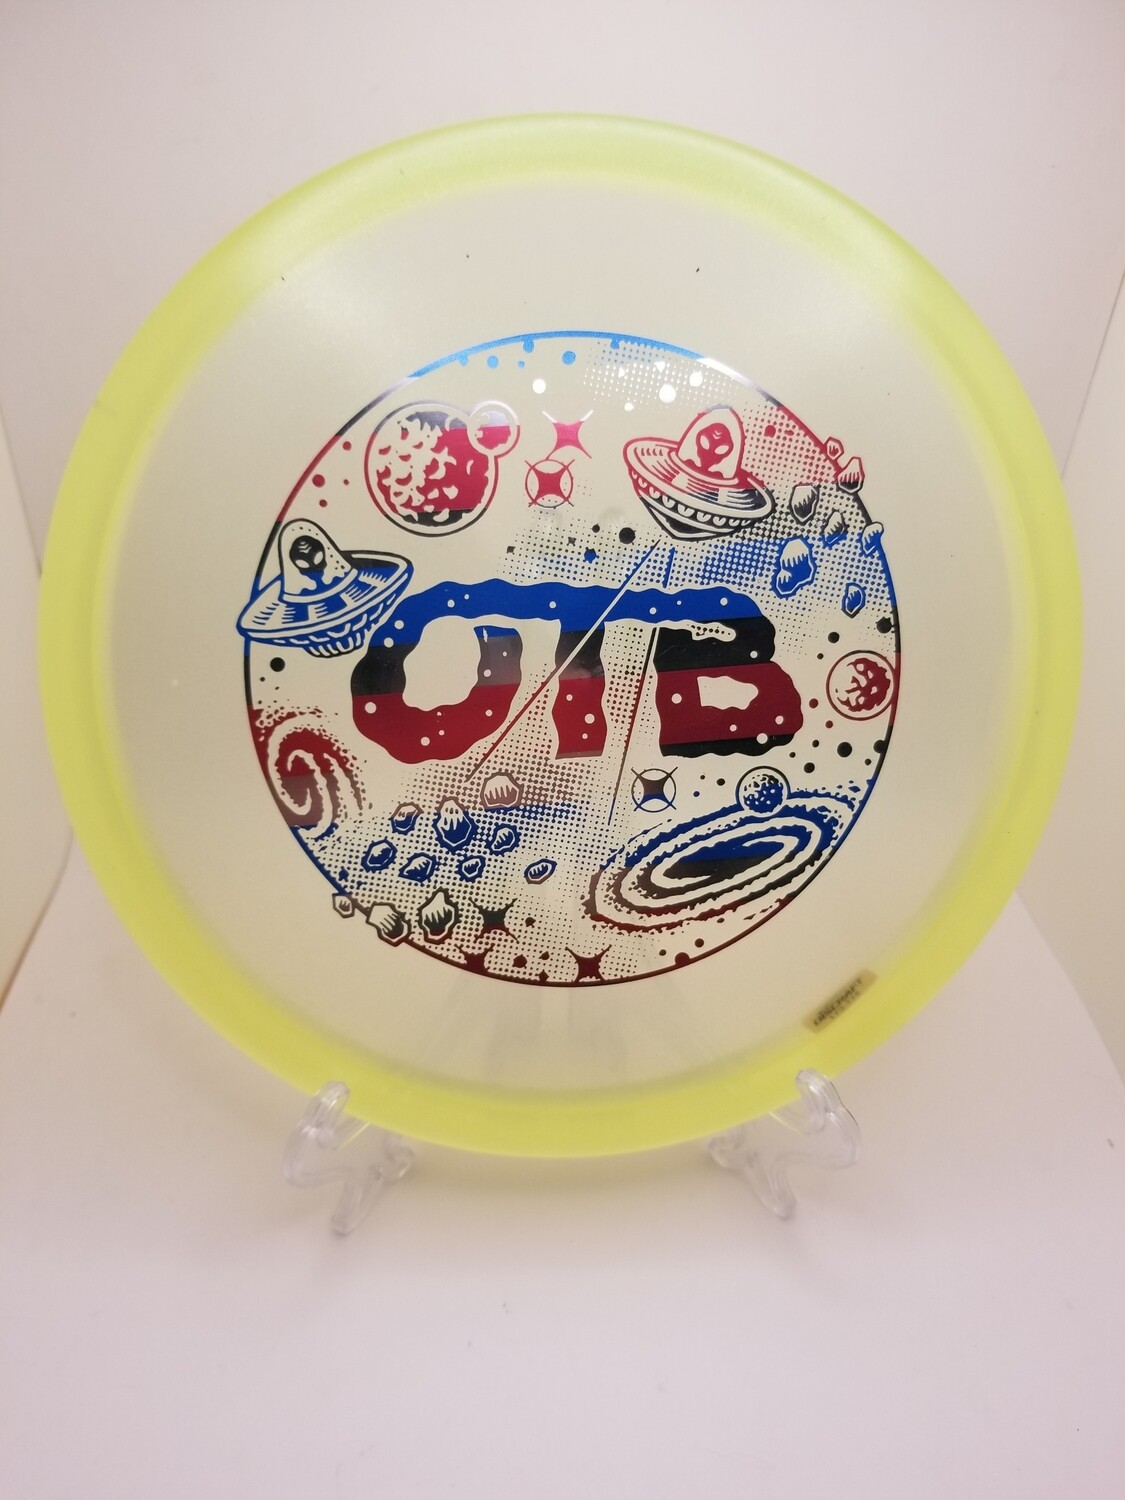 Discraft Discs OTB Color Shift Zone with Alien American Flag Stamp 173-174g